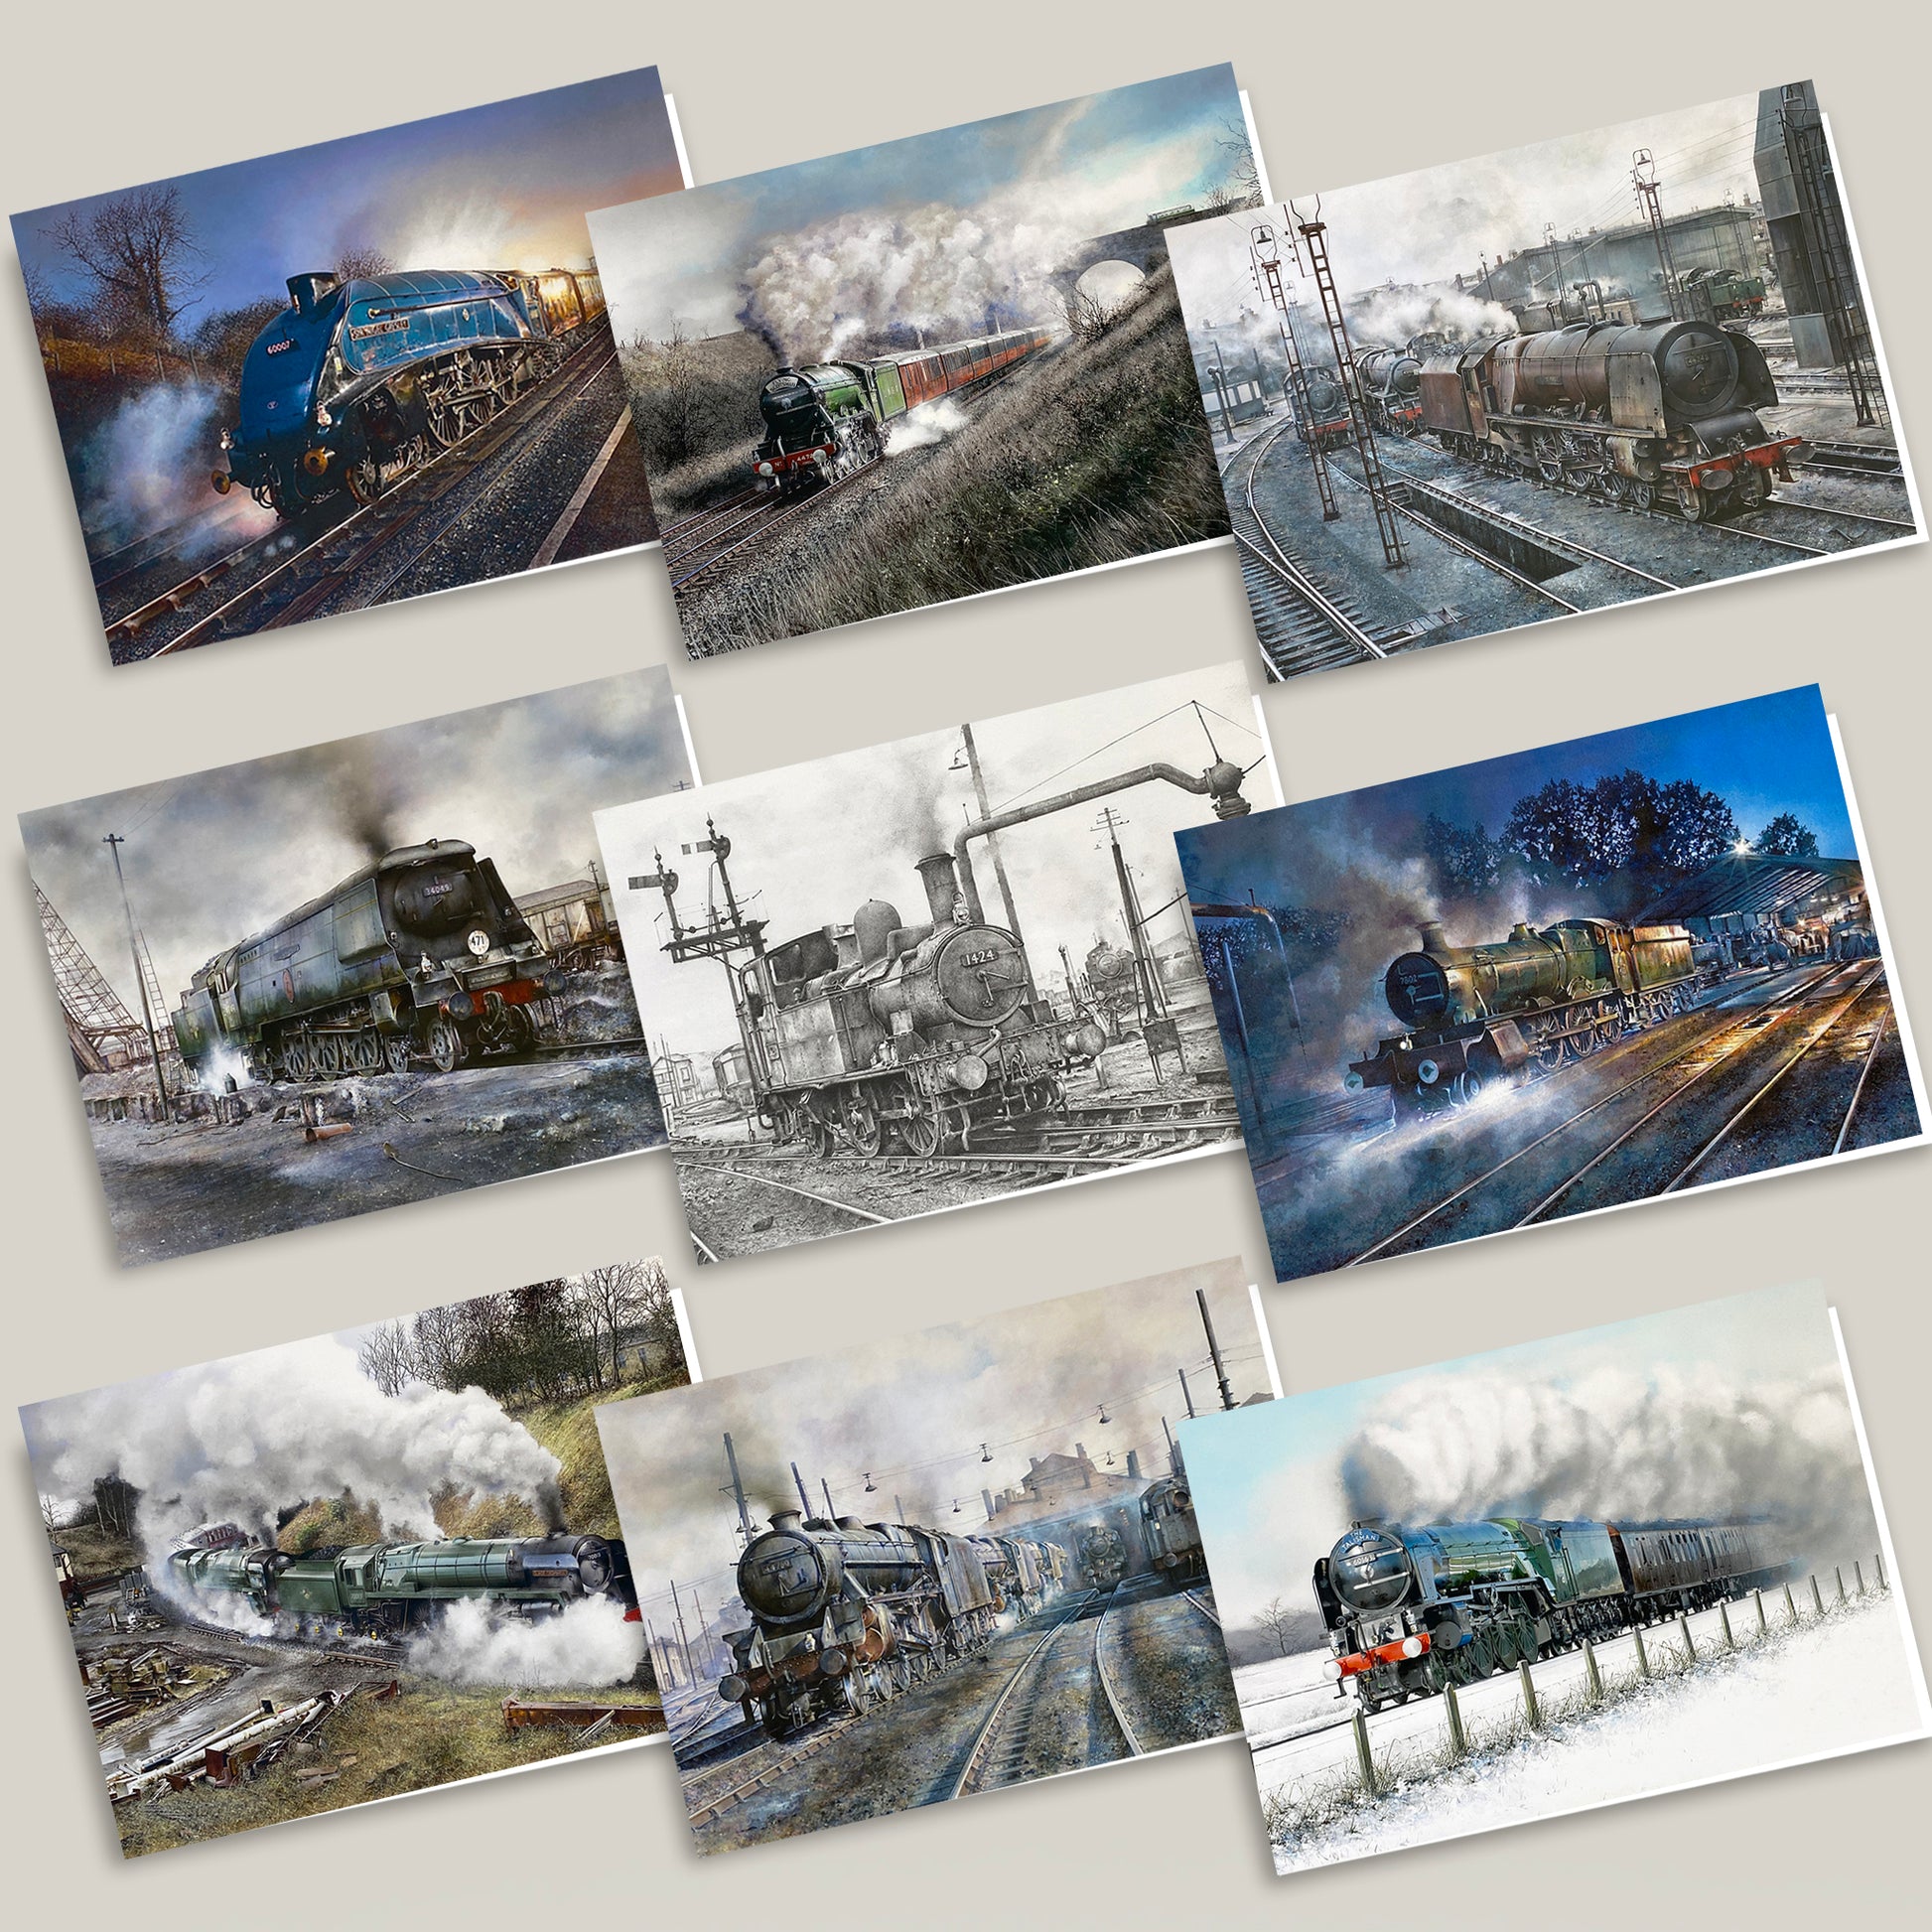 9 greeting cards with paintings of steam trains on